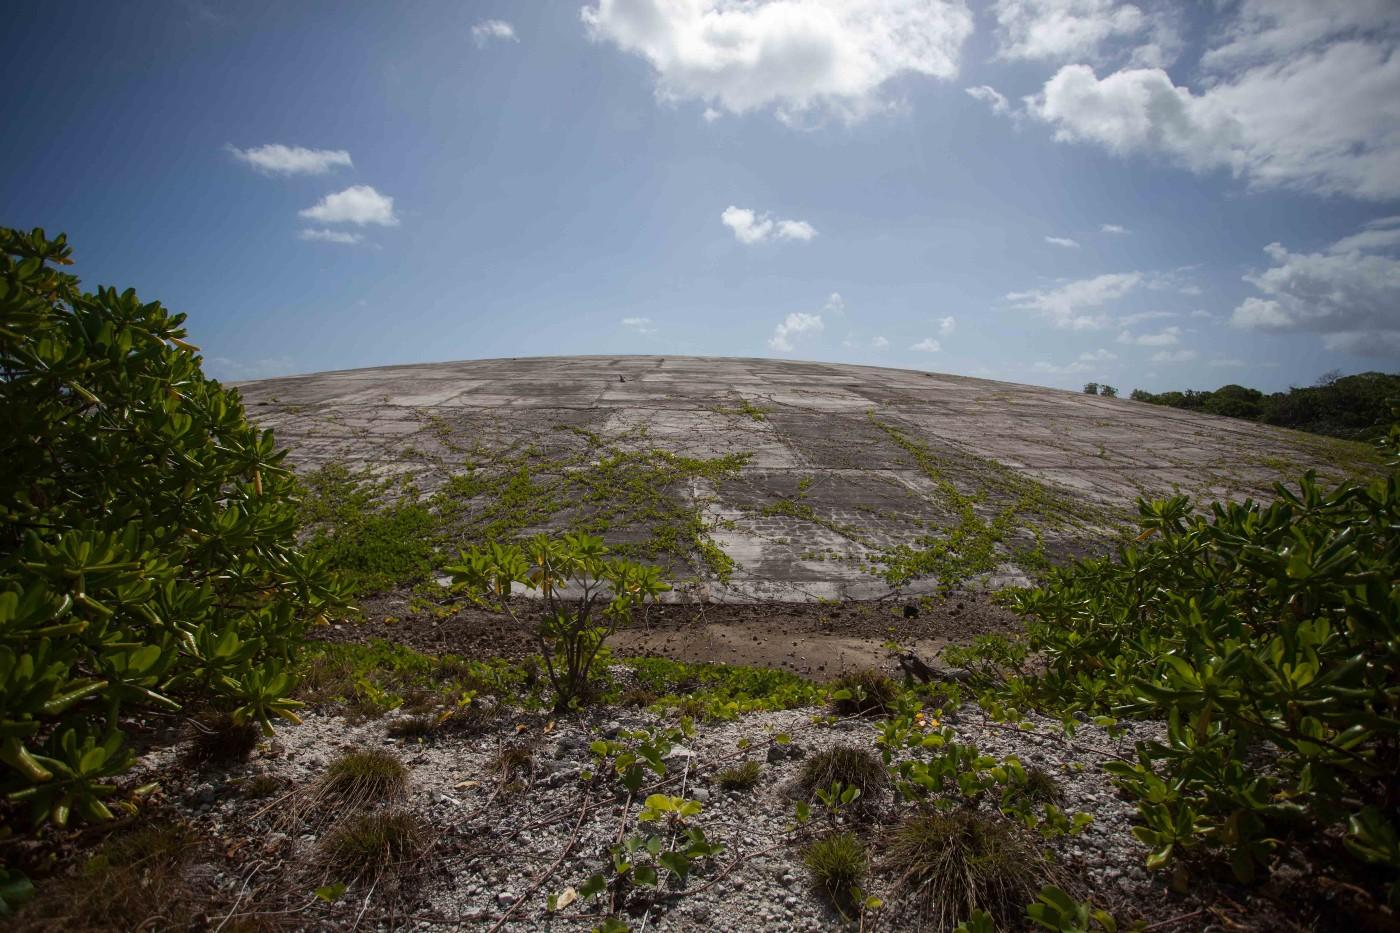 The “Cactus Dome,” a nuclear waste site on Runit island, remains a relic of U.S. presence in the Marshall Islands.